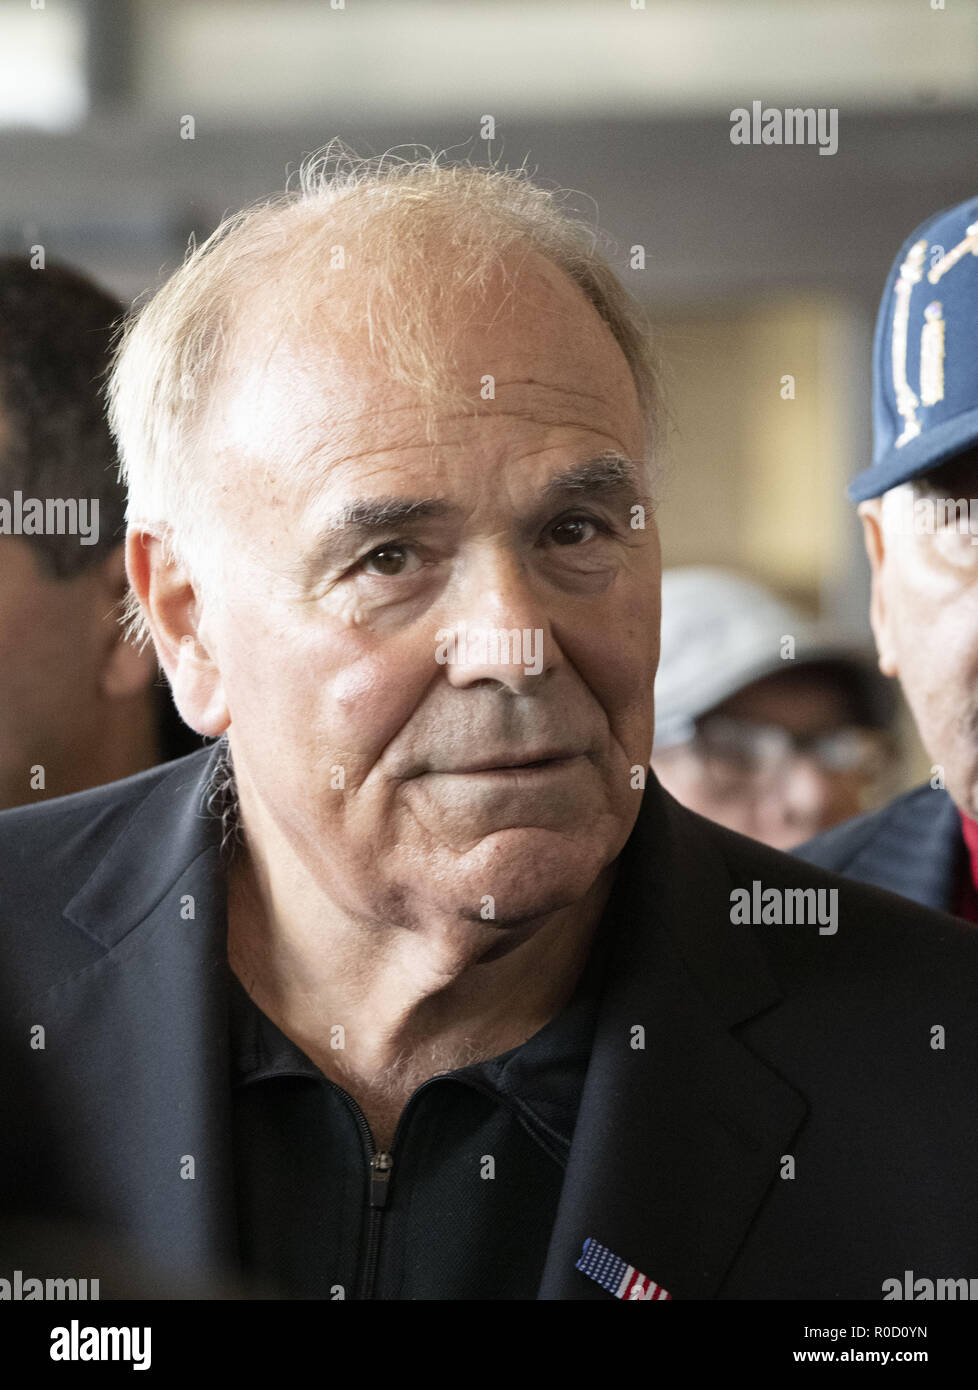 Cheltenham, Pennsylvania, USA. 3rd Nov, 2018. Former Pennsylvania Governor, ED RENDELL, at the get out the vote rally held at a shopping center in Cheltenham Pennsylvania Credit: Ricky Fitchett/ZUMA Wire/Alamy Live News Stock Photo